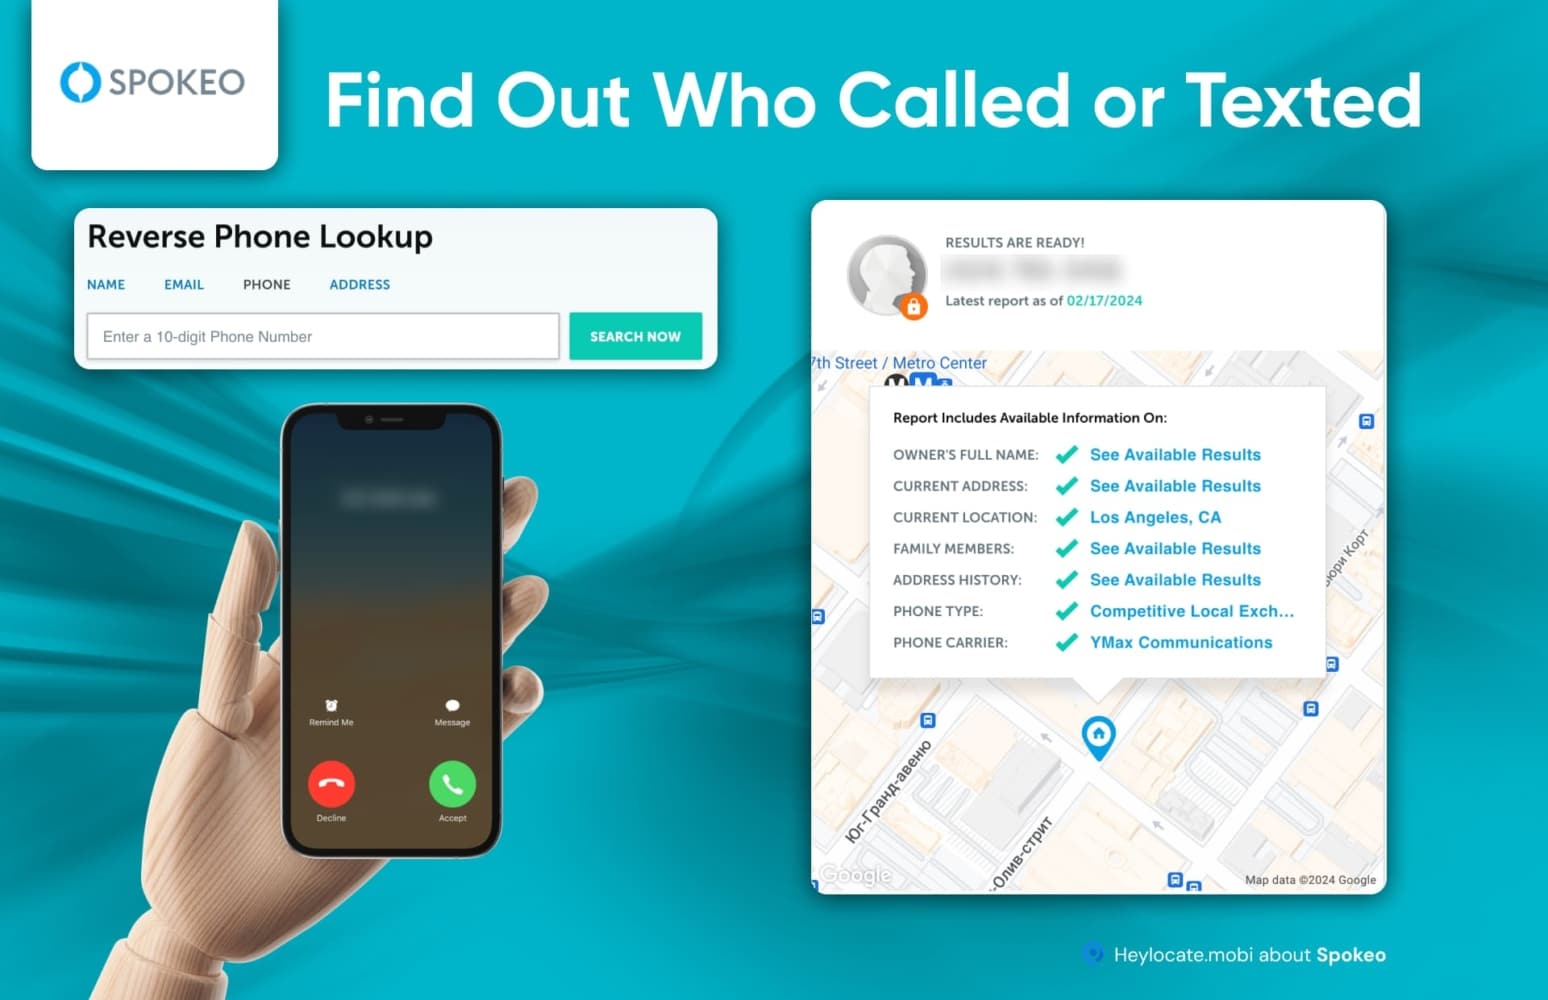 A promotional image for Spokeo's Reverse Phone Lookup feature. It displays a search bar inviting users to enter a 10-digit phone number, with a hand holding a phone showing an incoming call screen. To the right, there is a sample lookup result for a phone number with the specific location. The report promises to provide full name, current address, family members, address history, phone type, and carrier, with blue links indicating that detailed results are available. The service aims to help users identify unknown calls or texts.